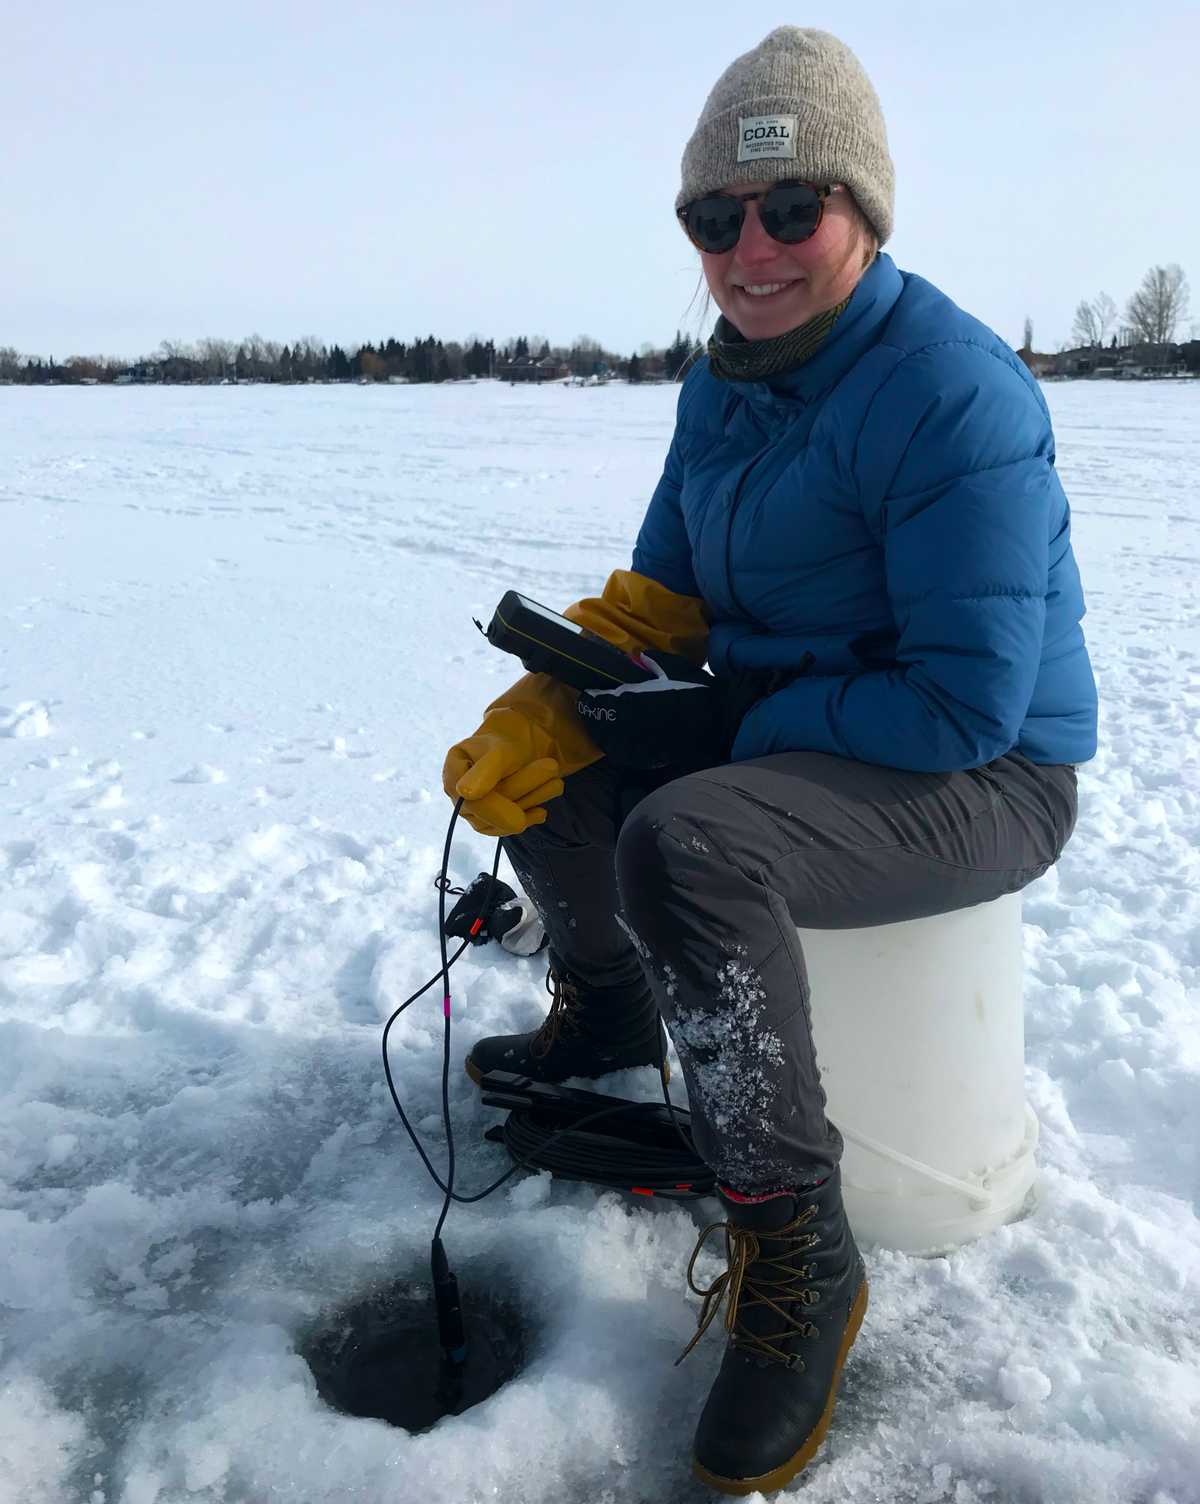 DataStream’s Mary Kruk learning how Winter LakeKeeper volunteers collect water quality data, using a probe to measure temperature and dissolved oxygen, and collecting bottled water samples for lab analysis.